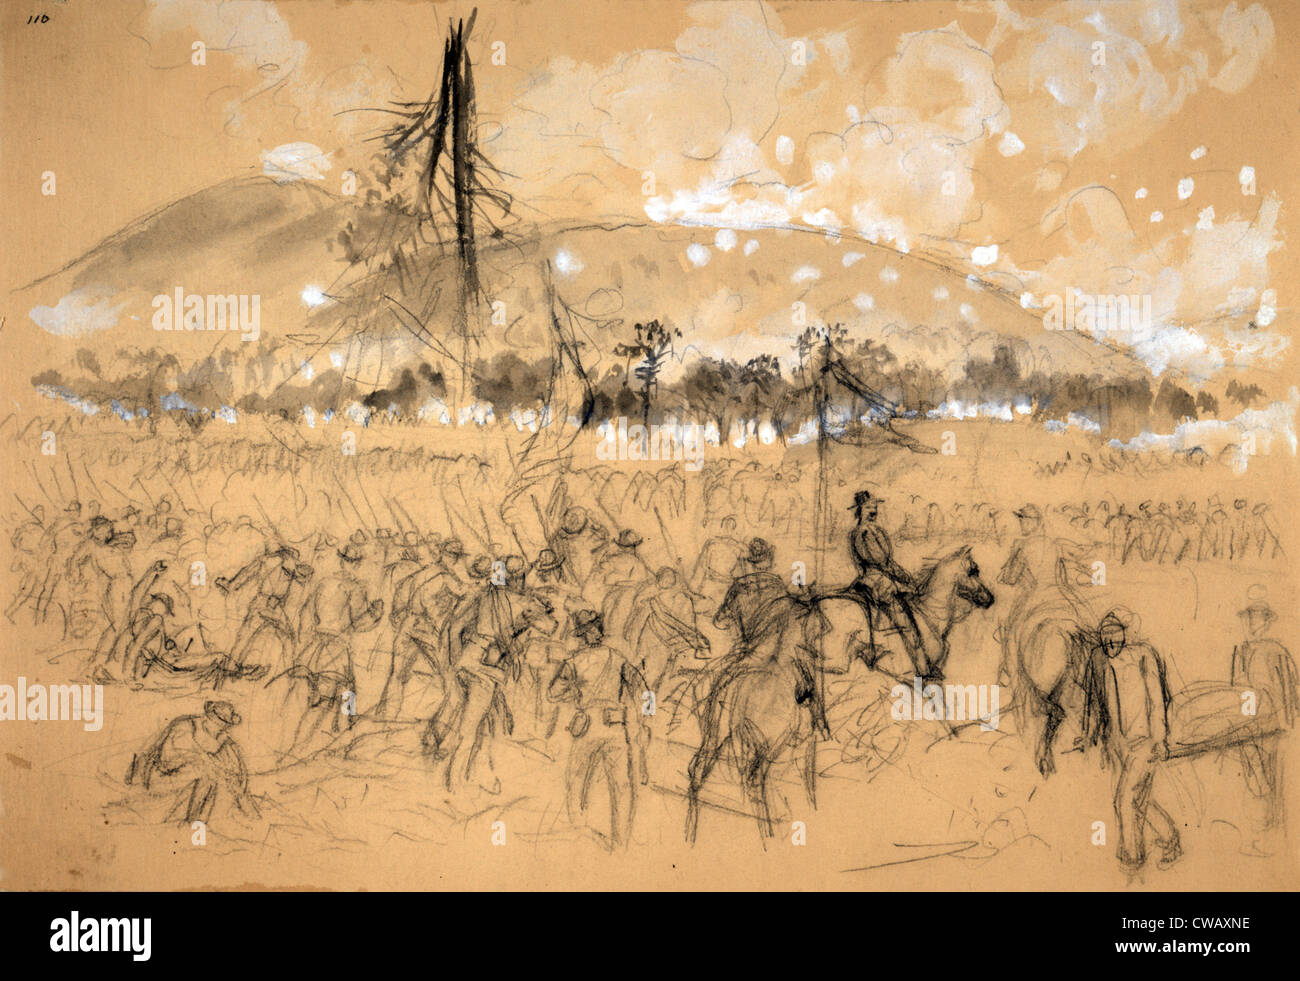 The Civil War, General William Tecumseh Sherman, at the Battle of Kennesaw Mountain, Georgia. Sketch of Union troops charging Stock Photo